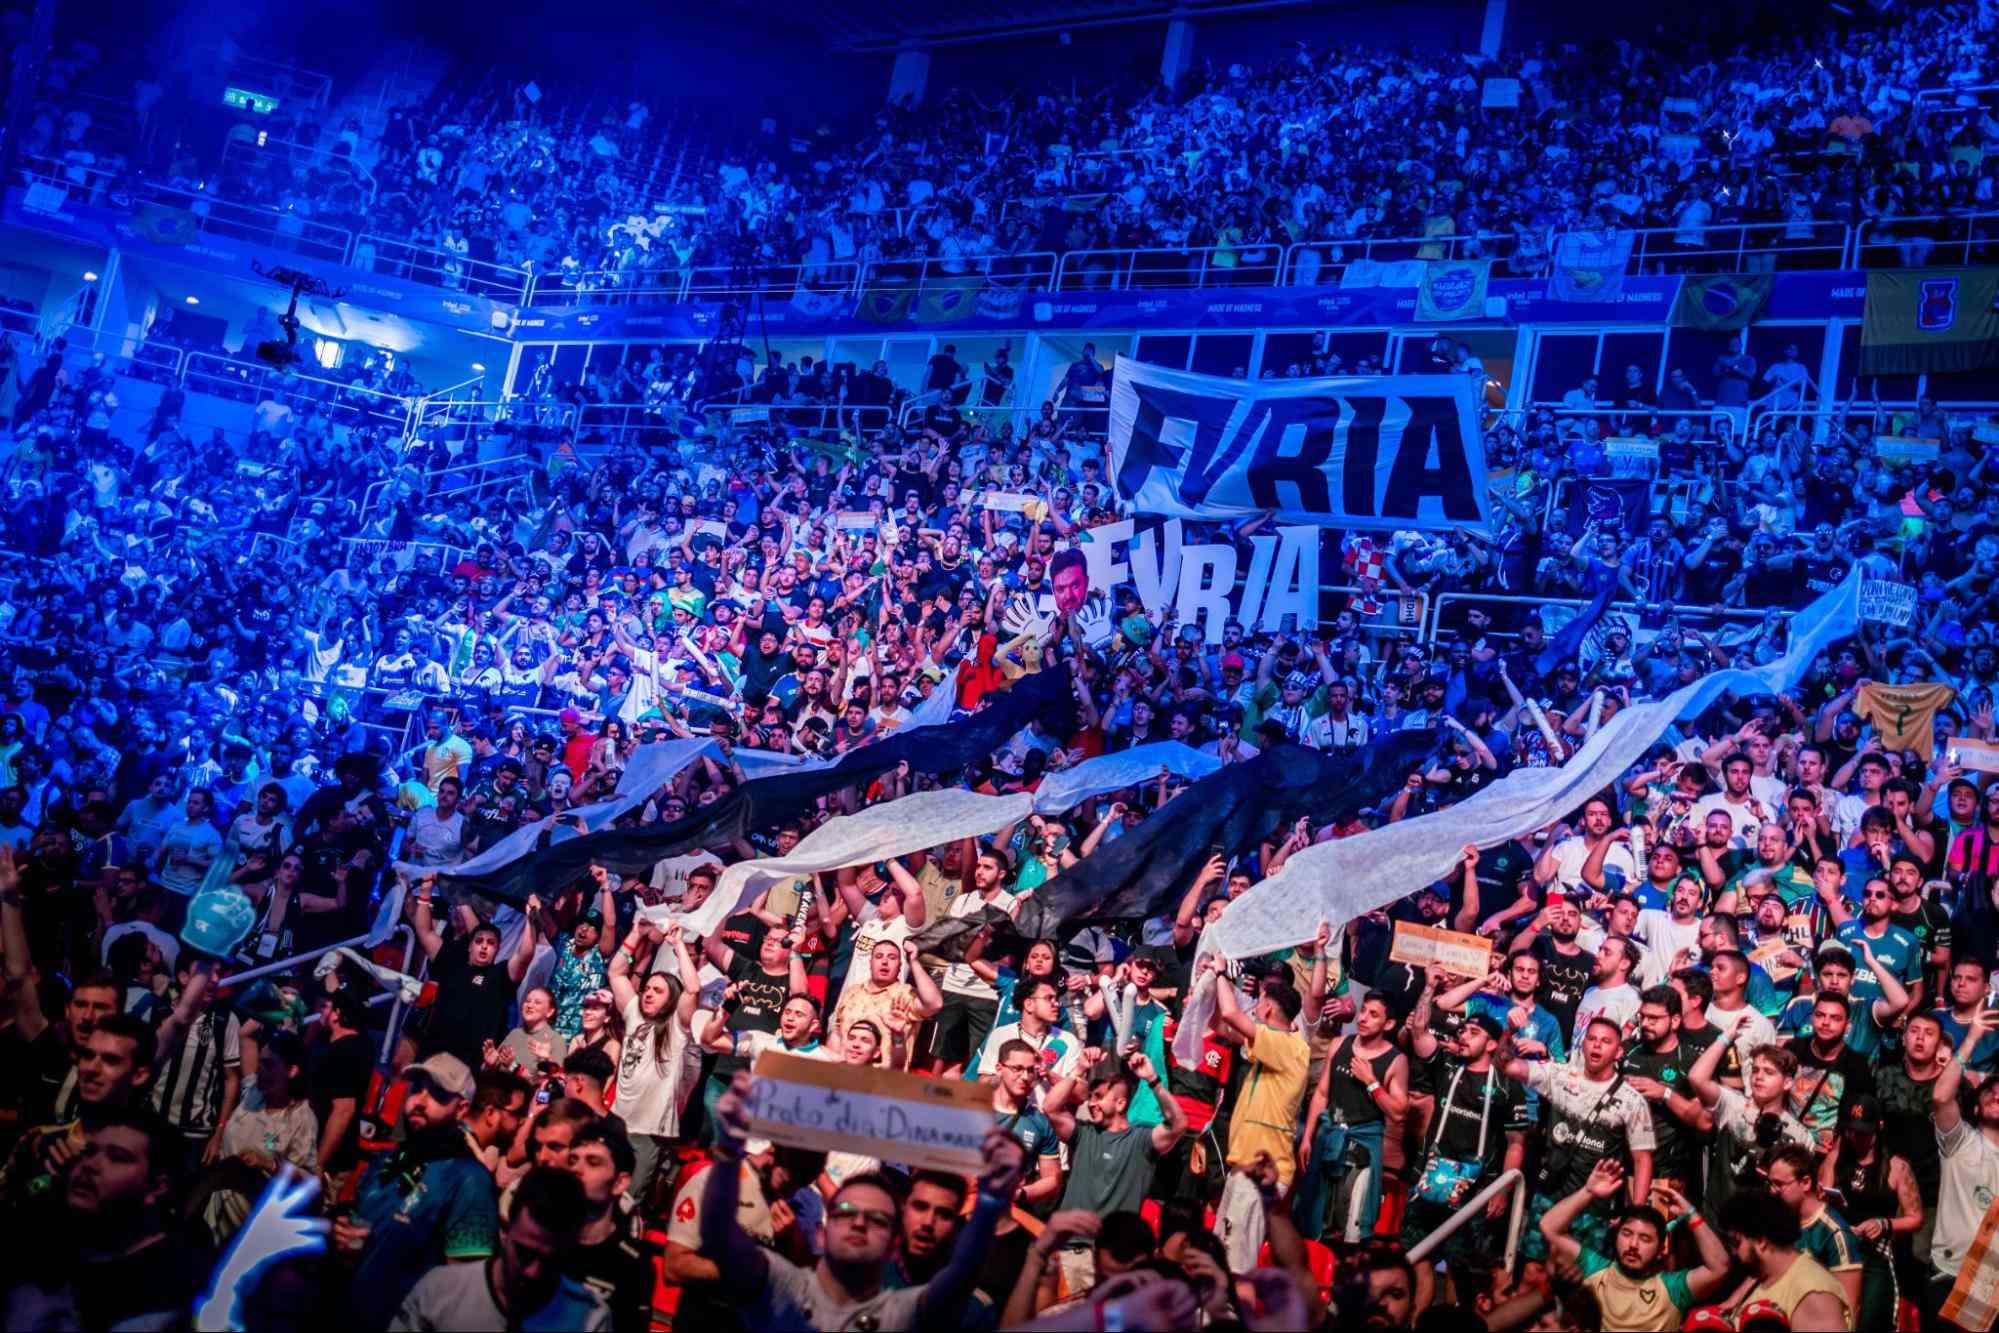 Picture of fans at a CS:GO event. Credit: ESL/@Vexanie